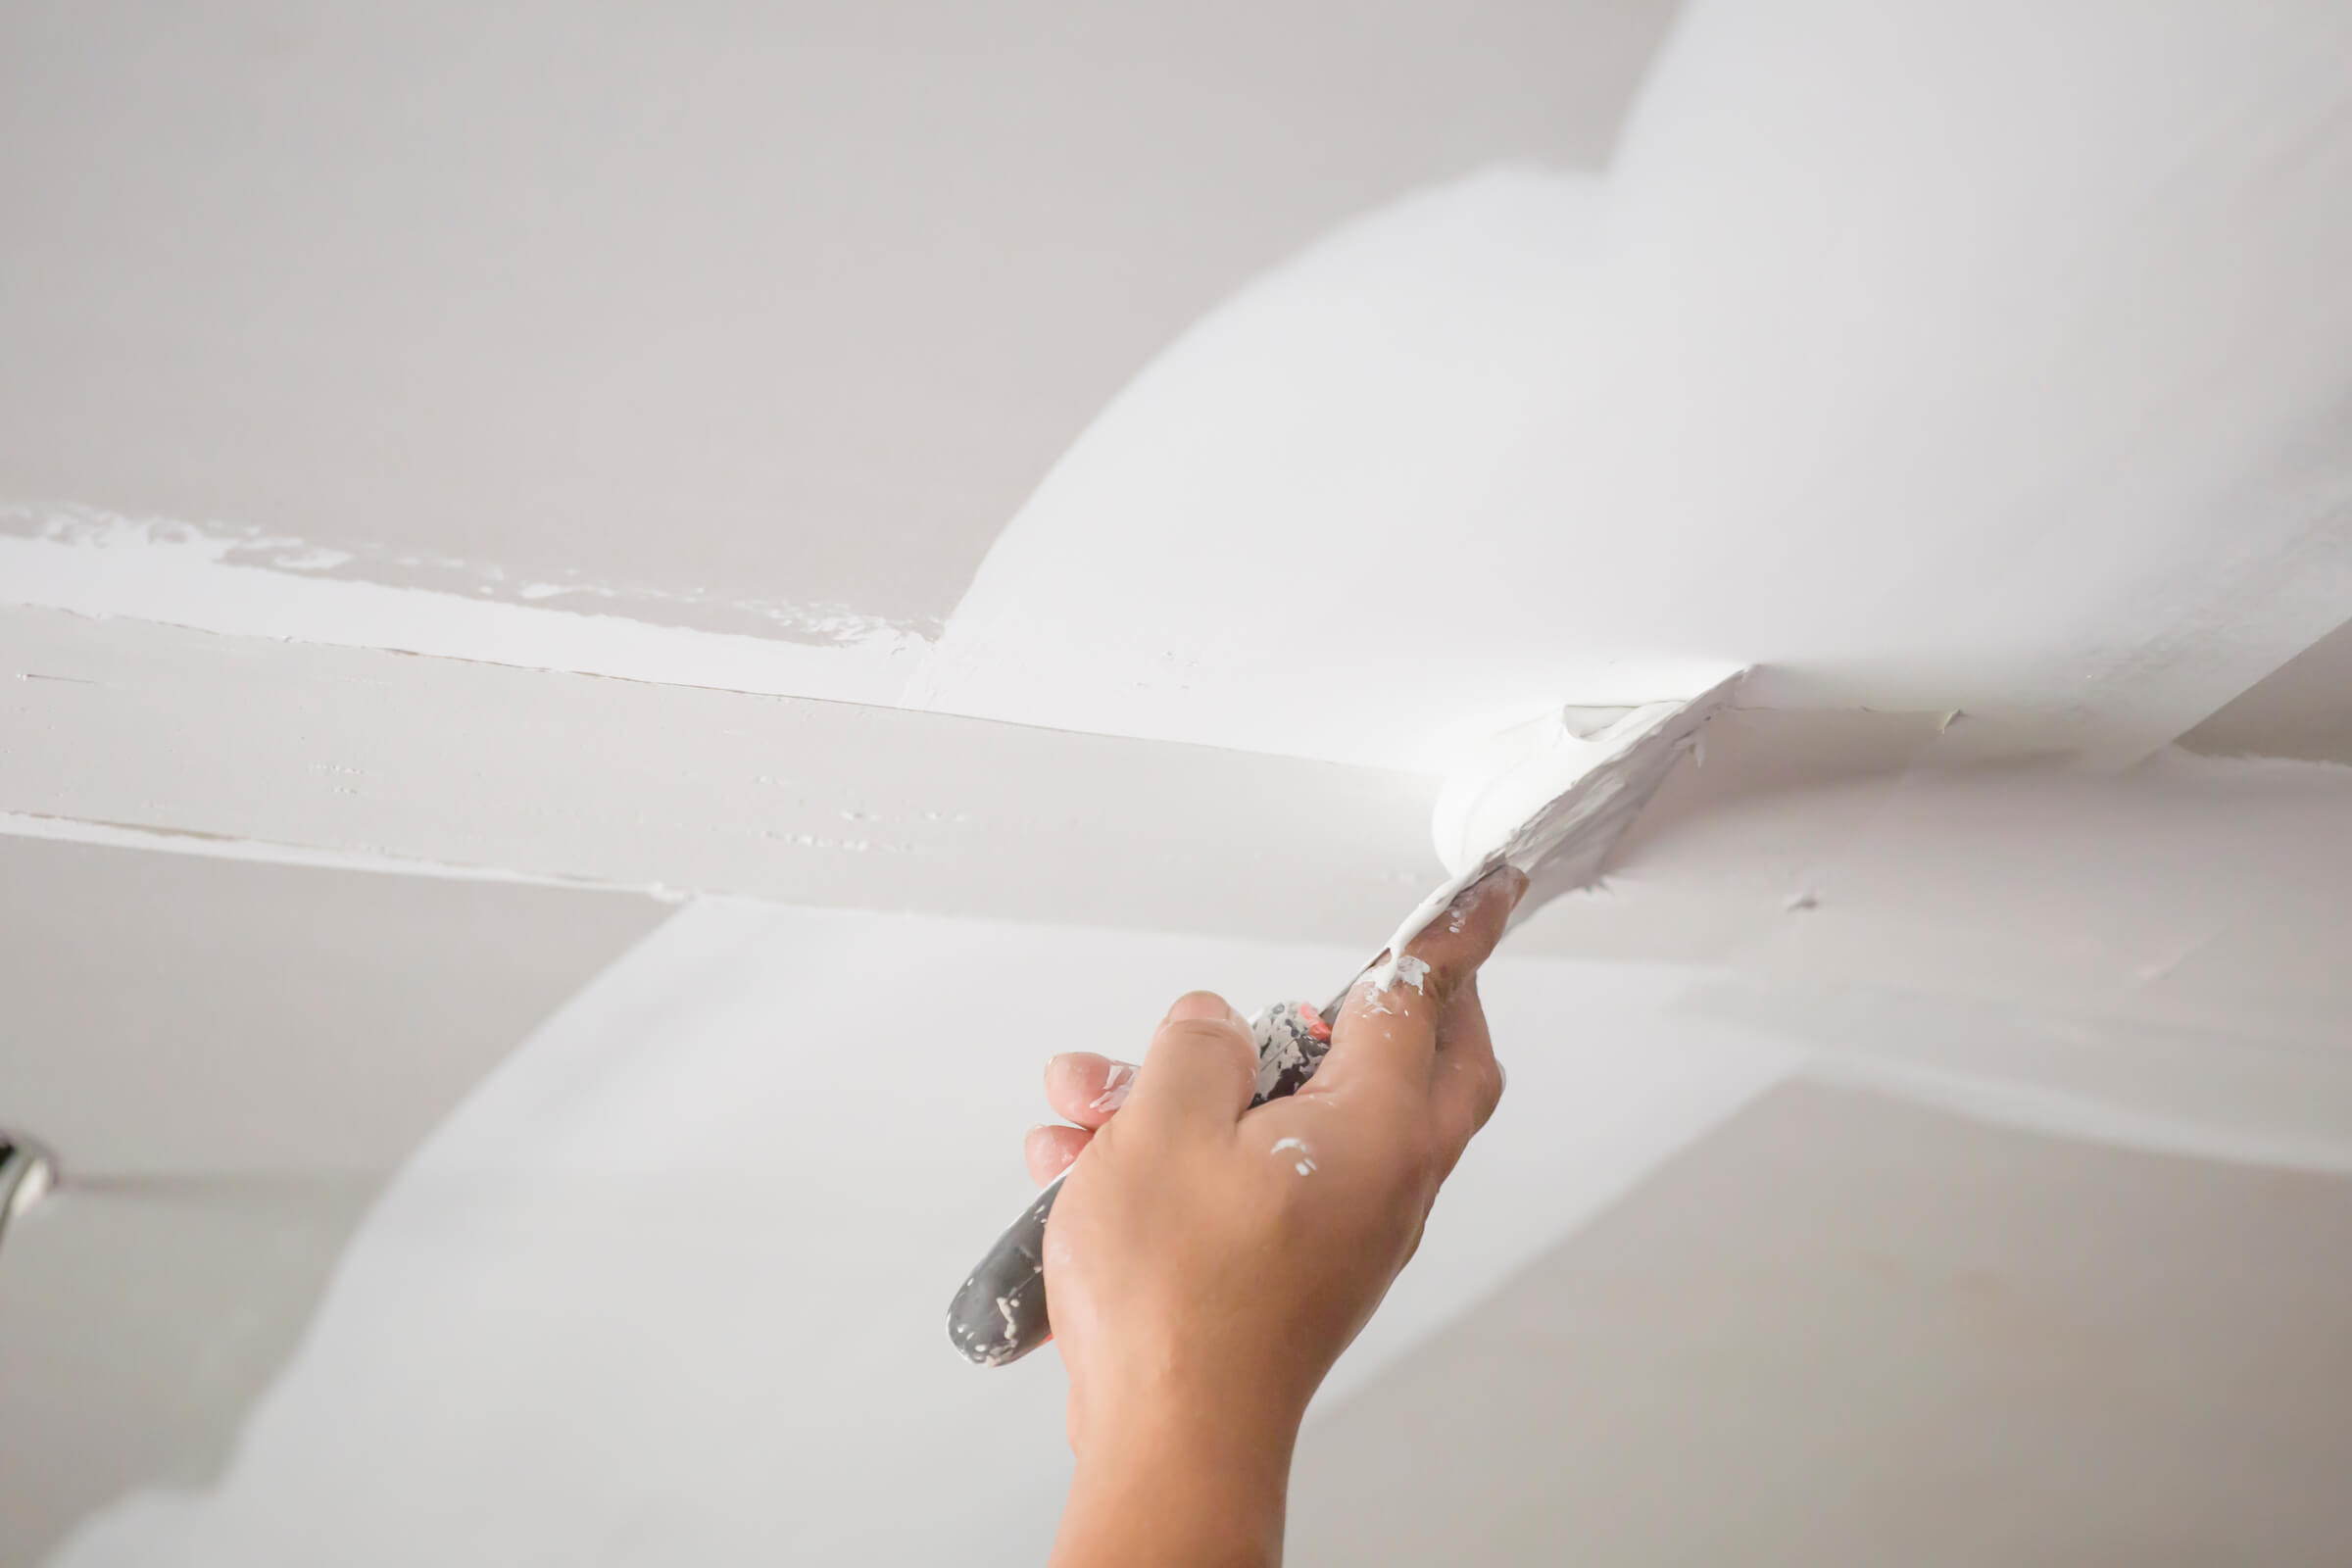 Drywall Repair-South Florida Popcorn Ceiling Removal-We offer professional popcorn removal services, residential & commercial popcorn ceiling removal, Knockdown Texture, Orange Peel Ceilings, Smooth Ceiling Finish, and Drywall Repair